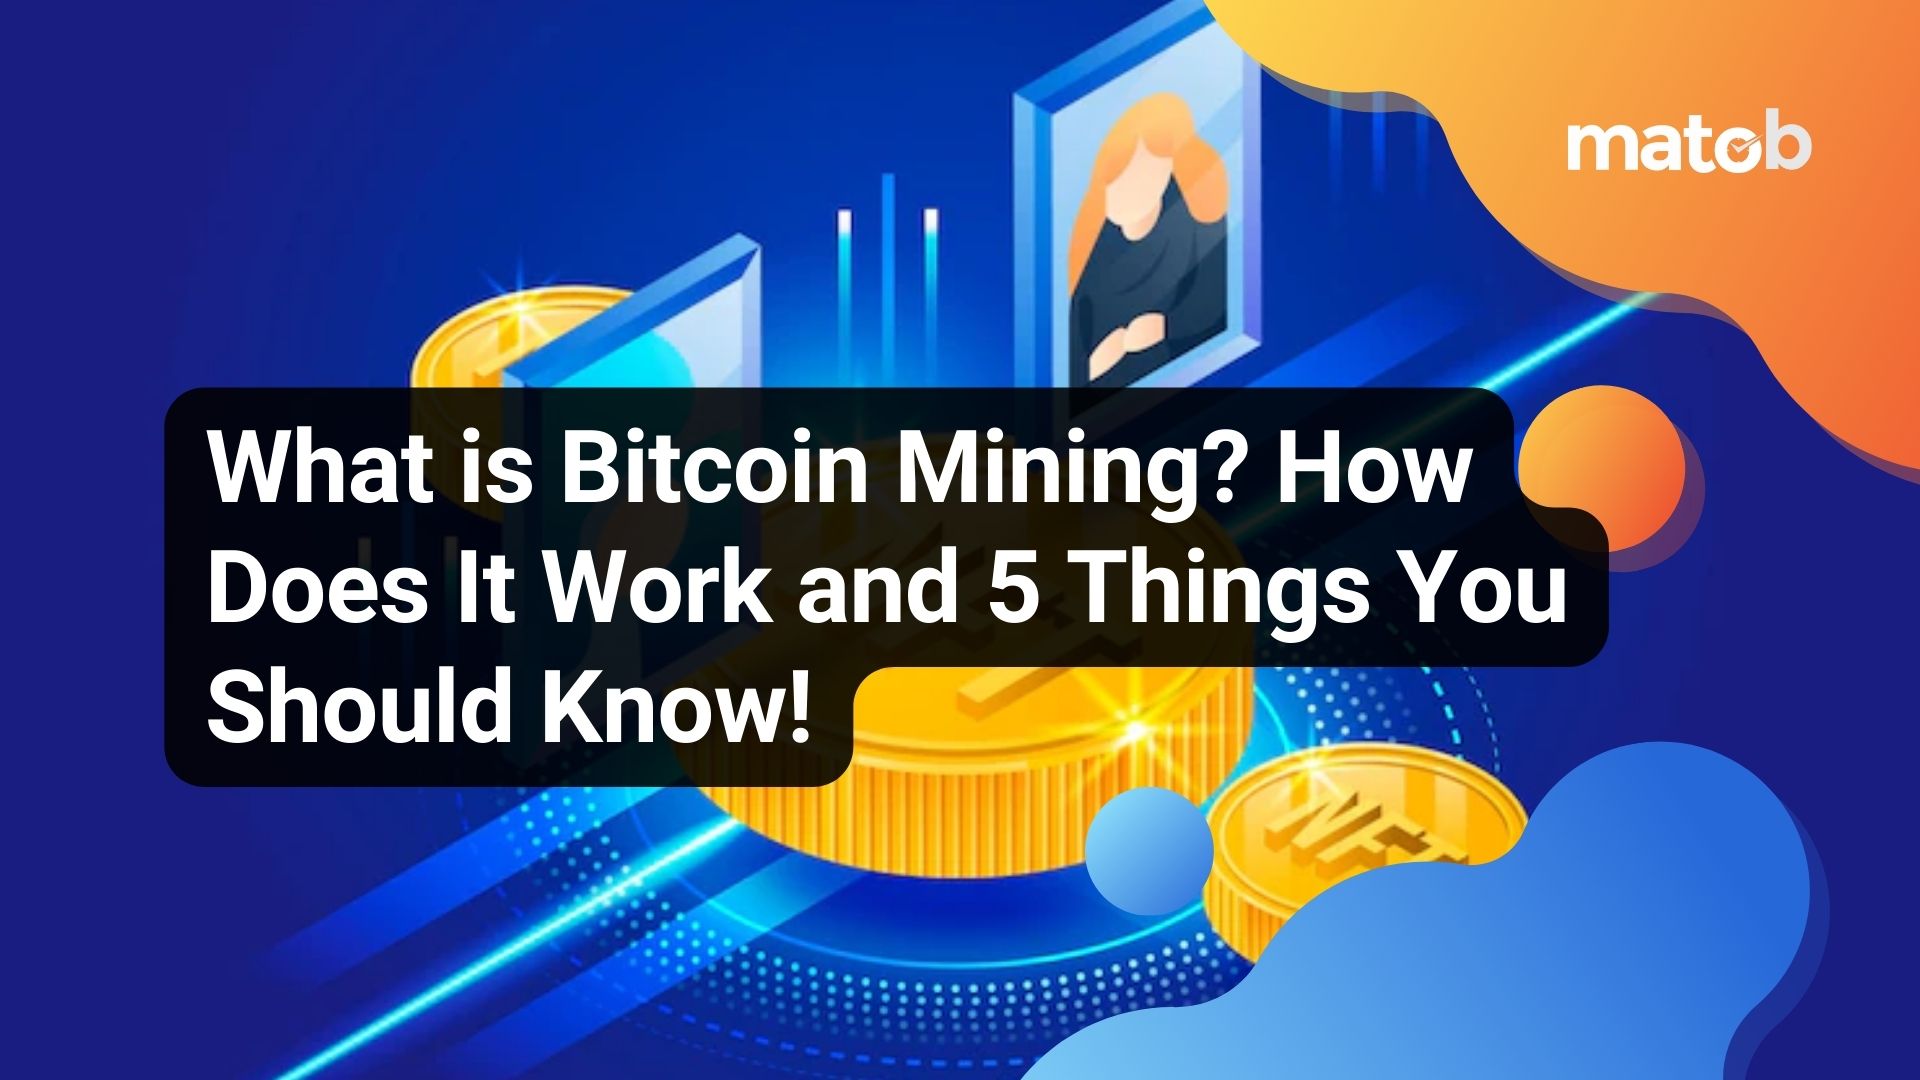 What is Bitcoin Mining? How Does It Work and 5 Things You Should Know!